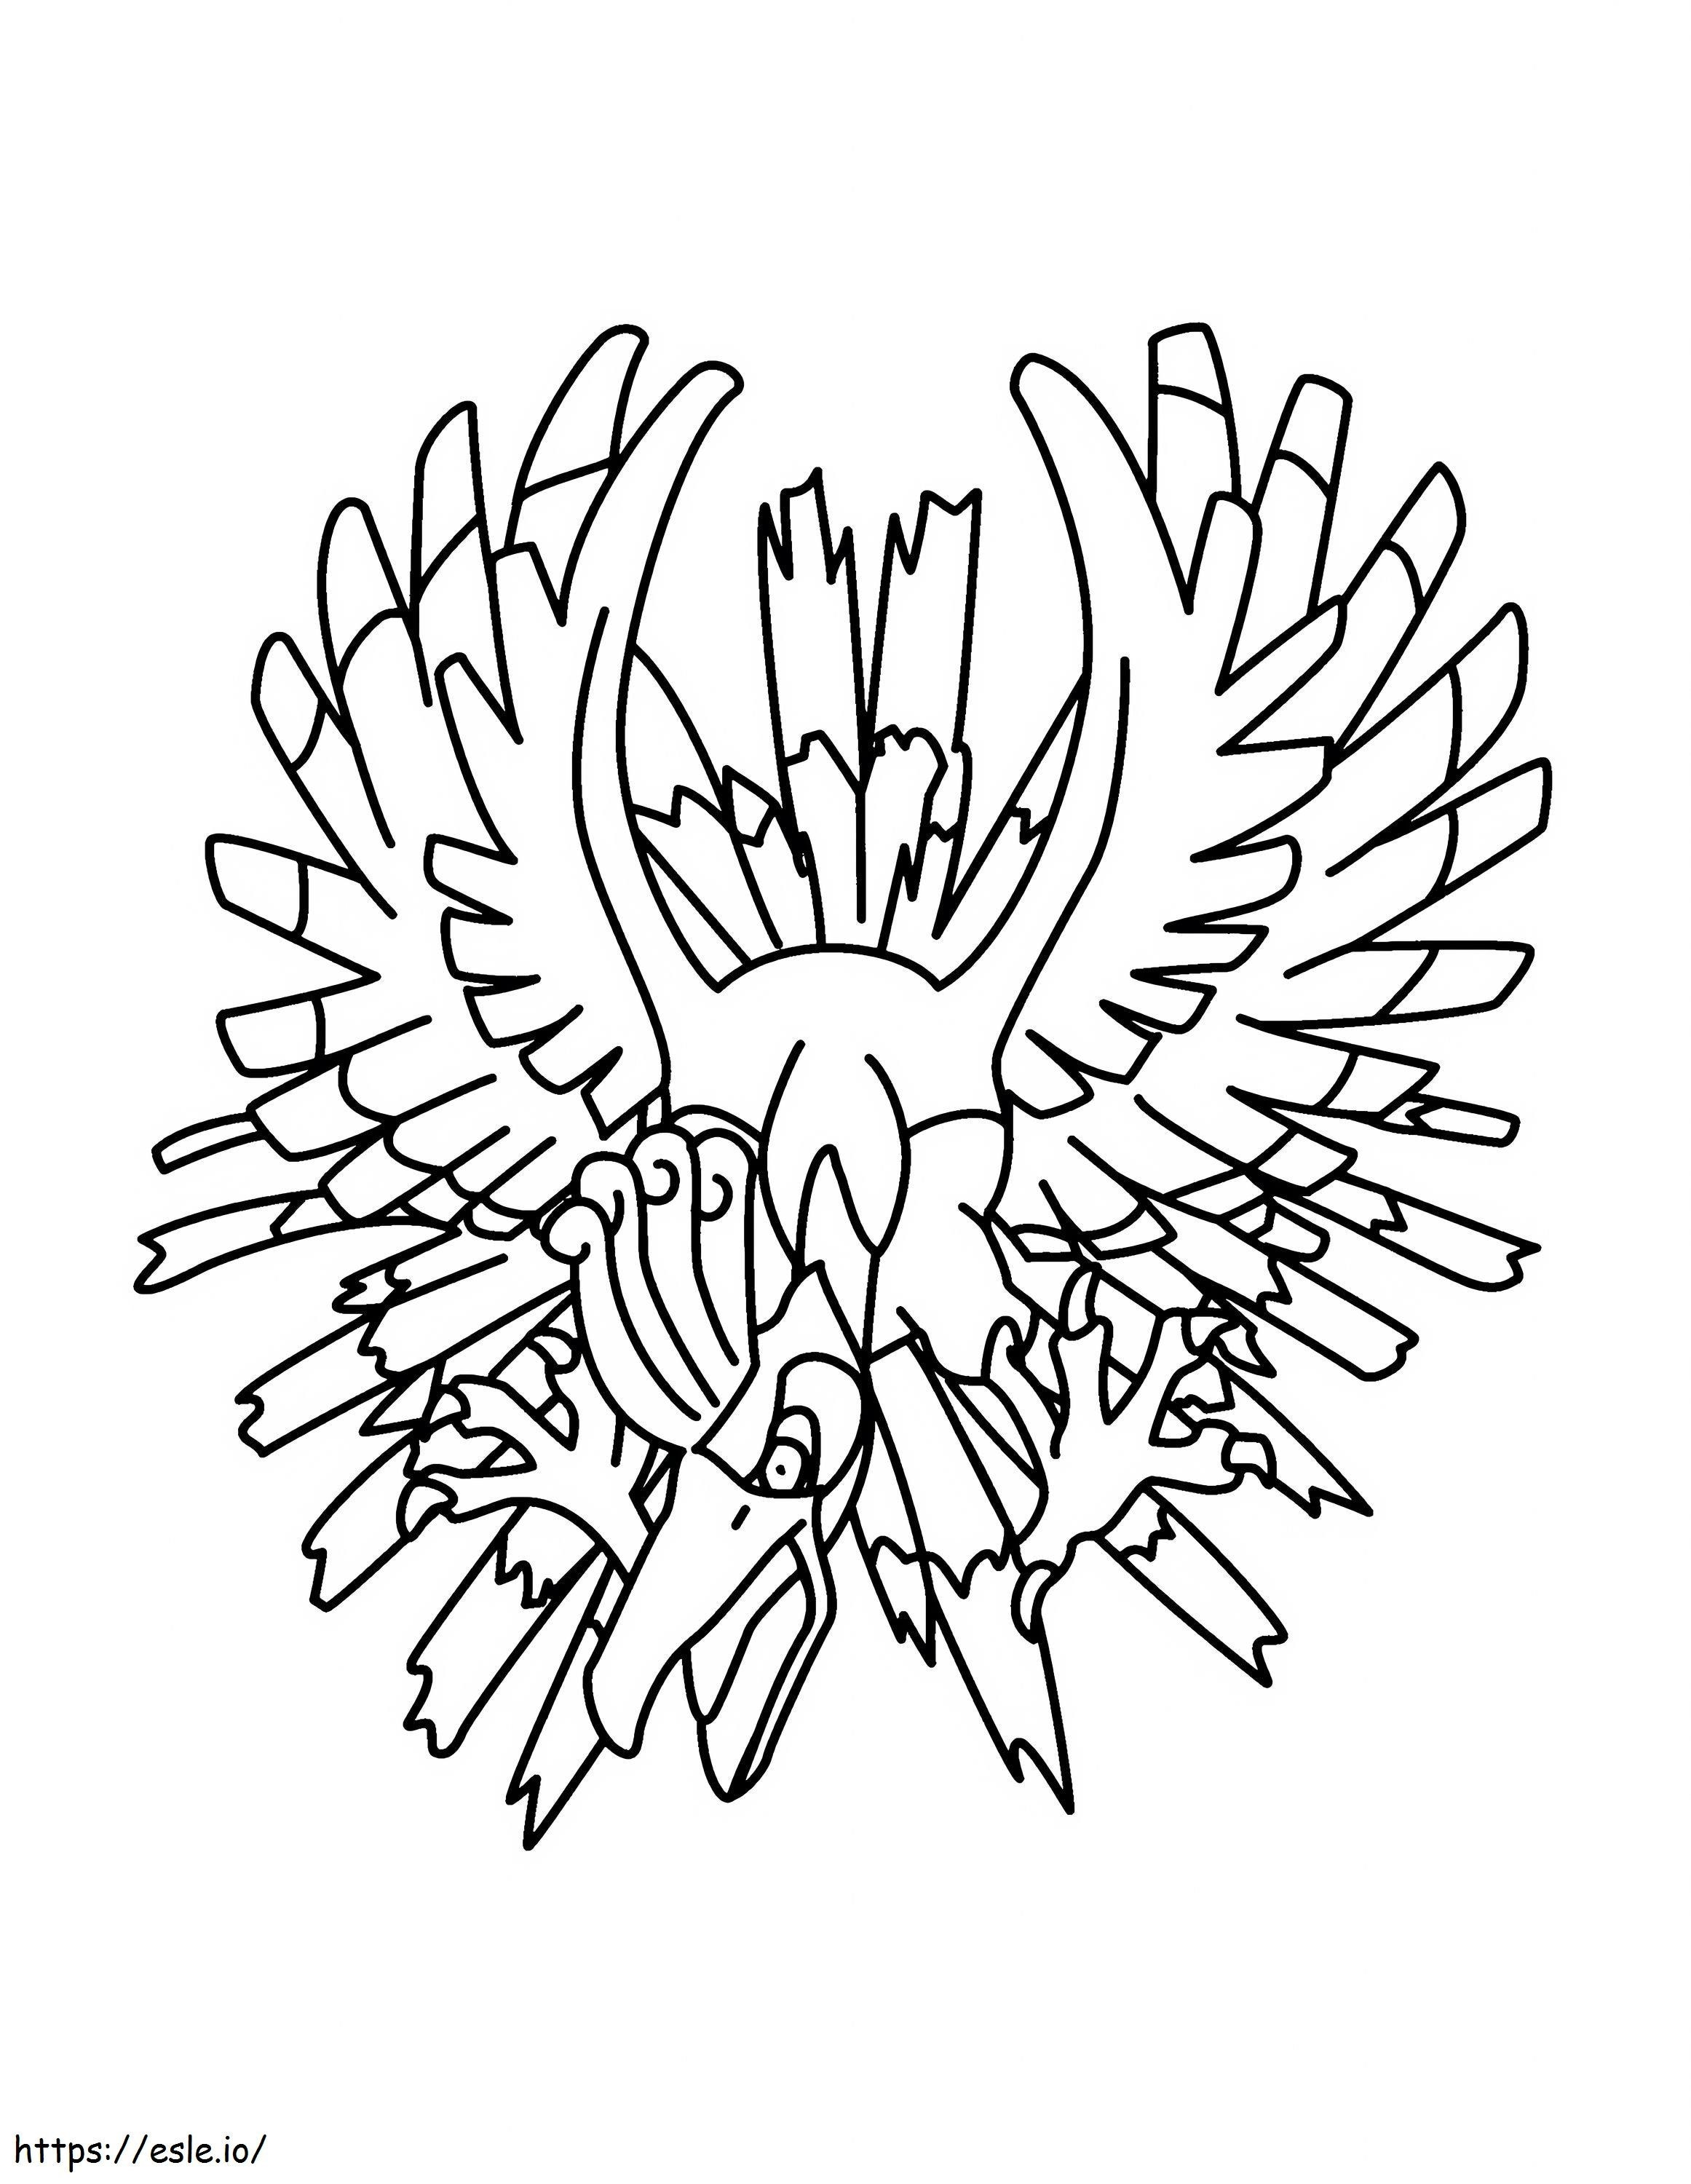 Ho Oh 5 Scaled coloring page